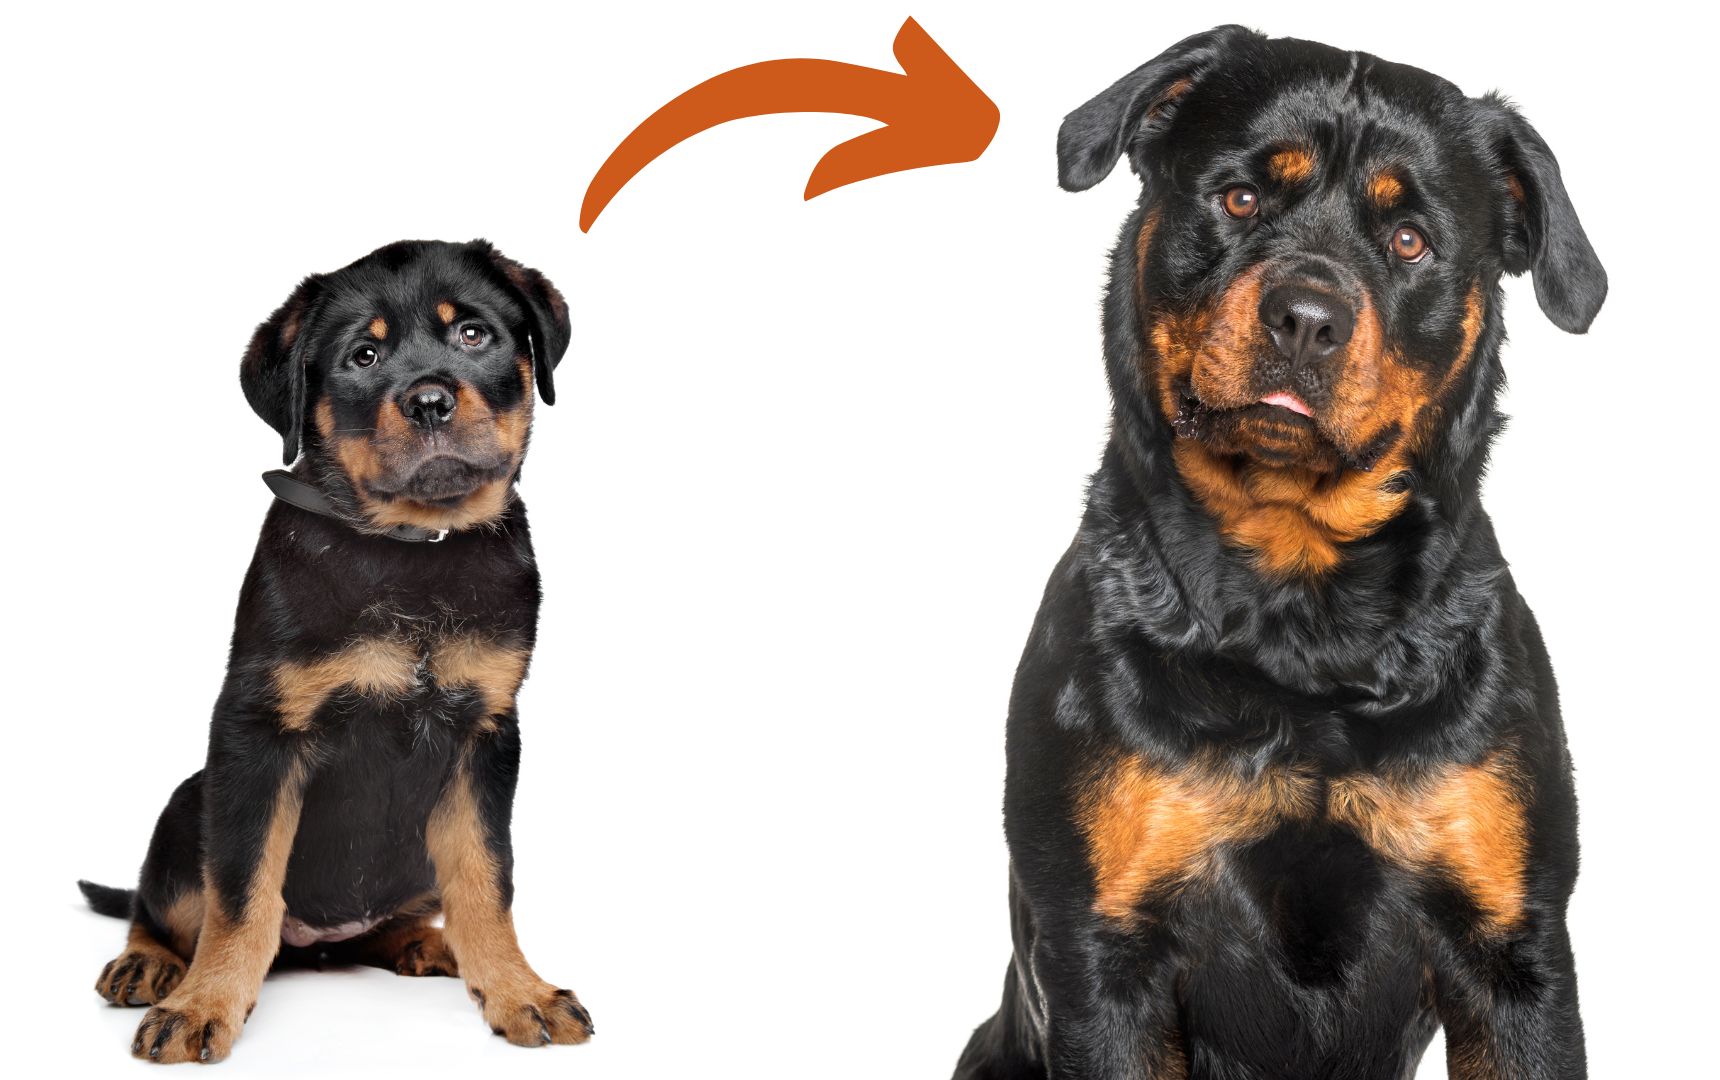 how old is too old to breed a rottweiler? 2